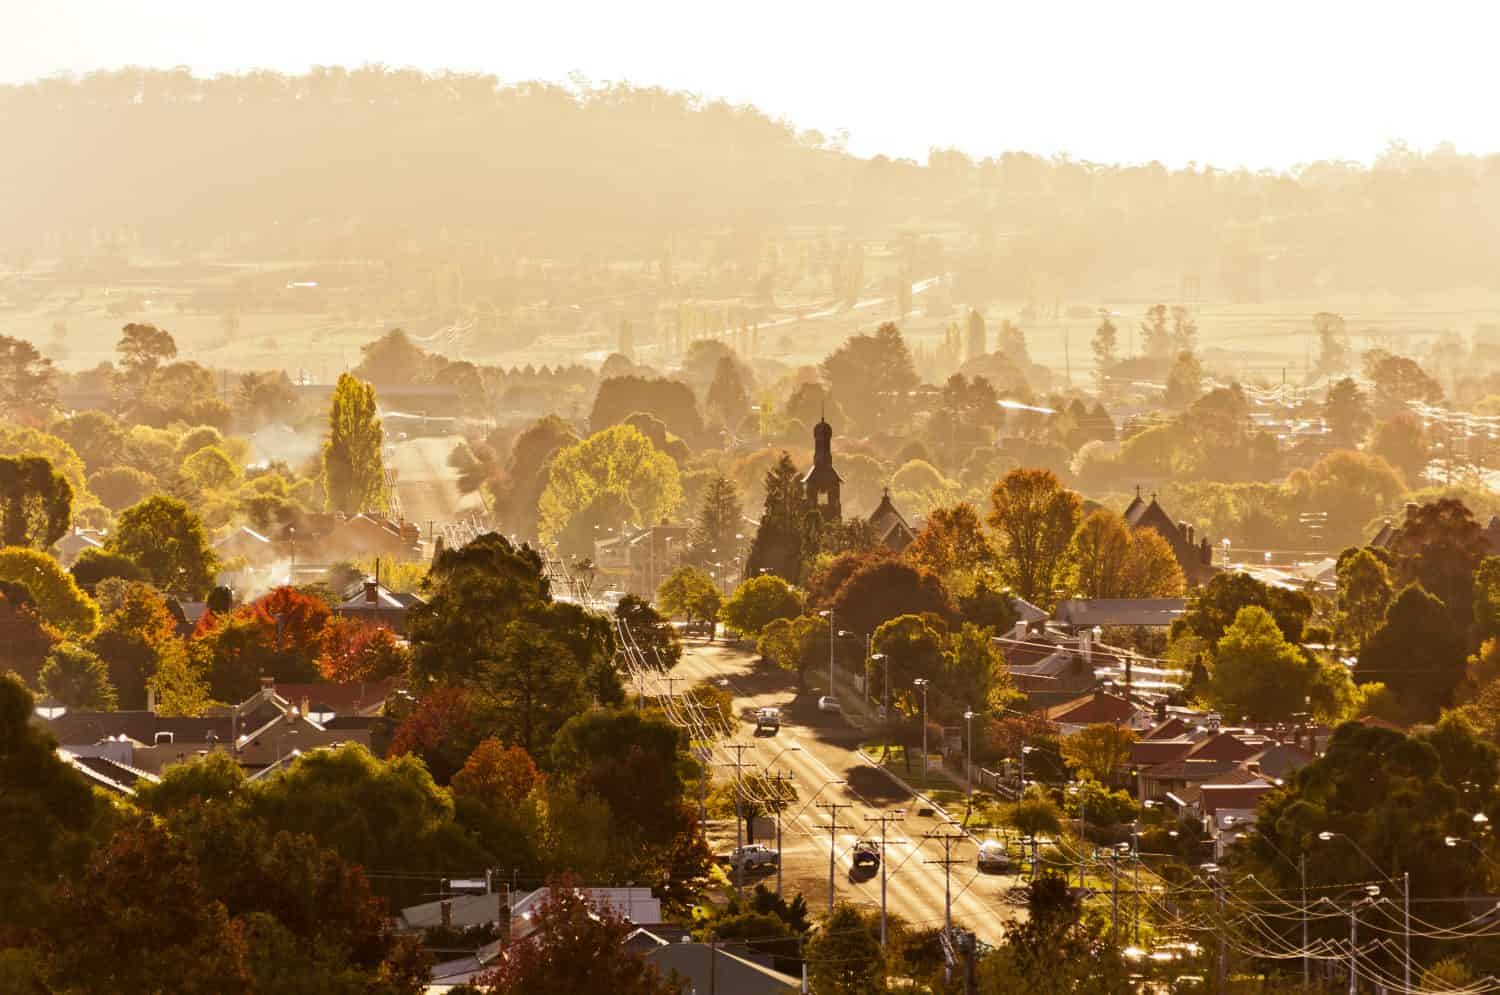 This is the town of Glen Innes in New South Wales, Australia. Morning mist fills rural town full of trees in autumn colors.